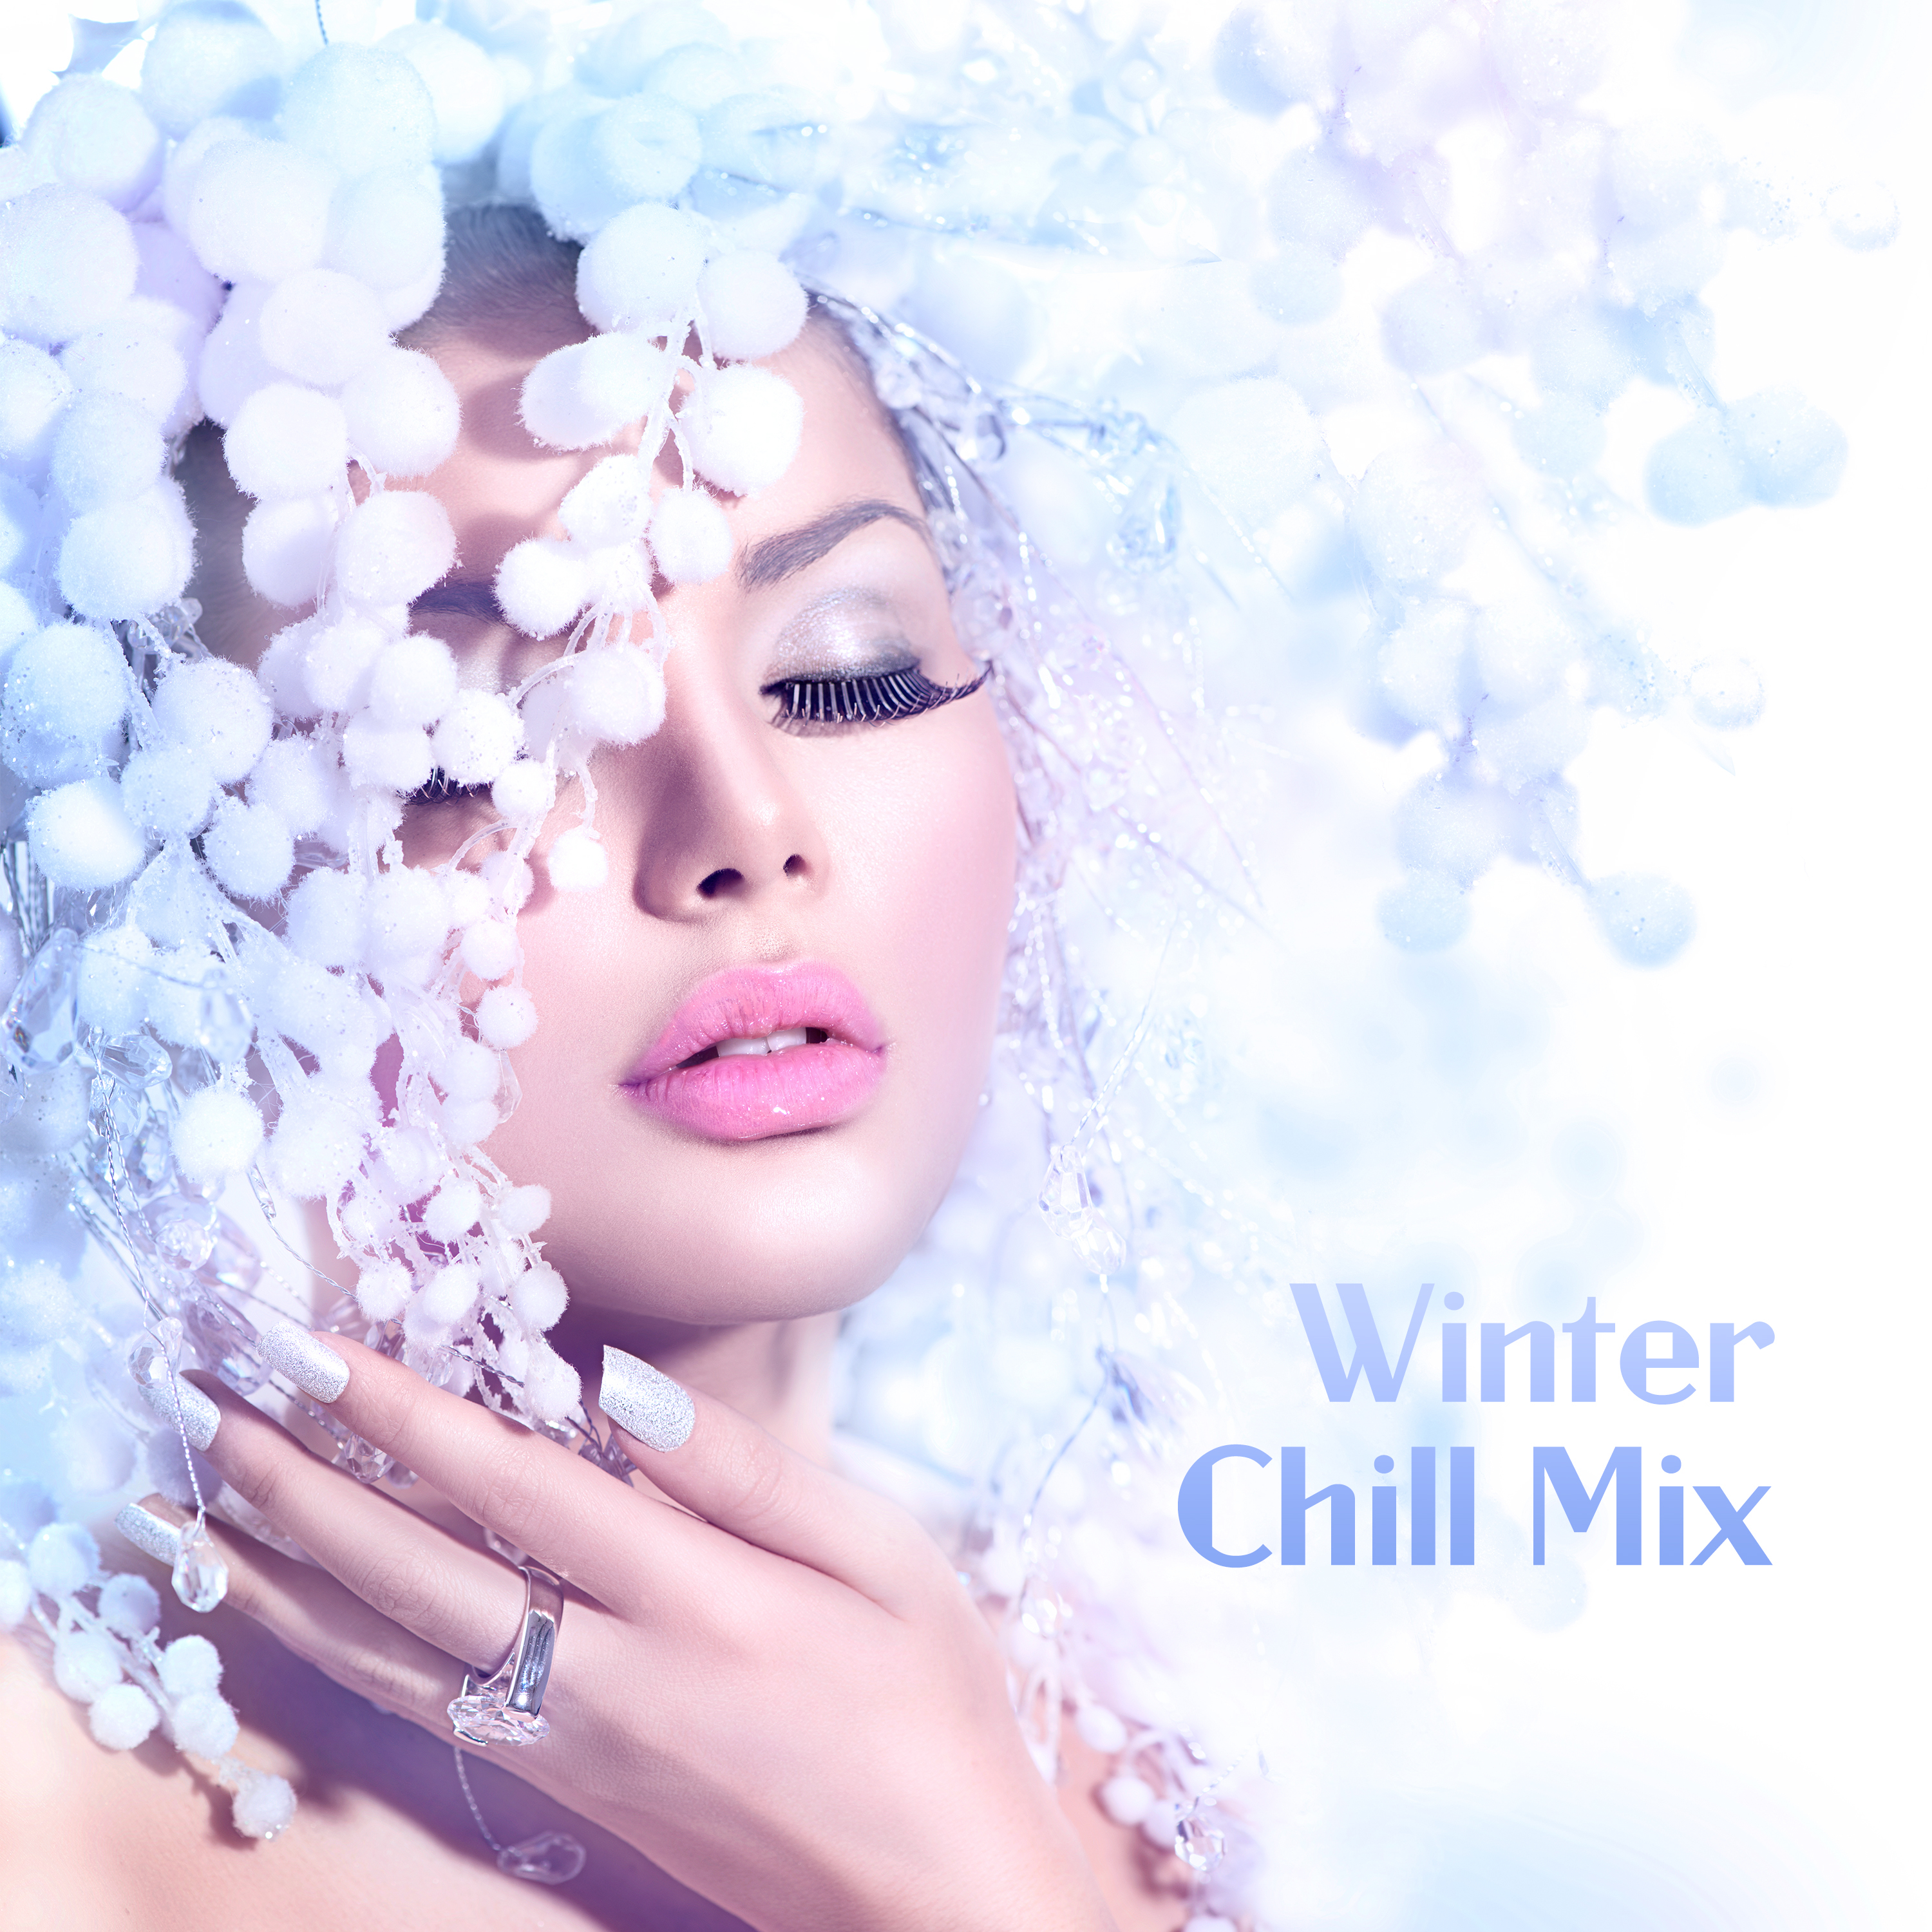 Winter Chill Mix (Special Collection of Chill House Music, Snow Party, Winter Lounge)